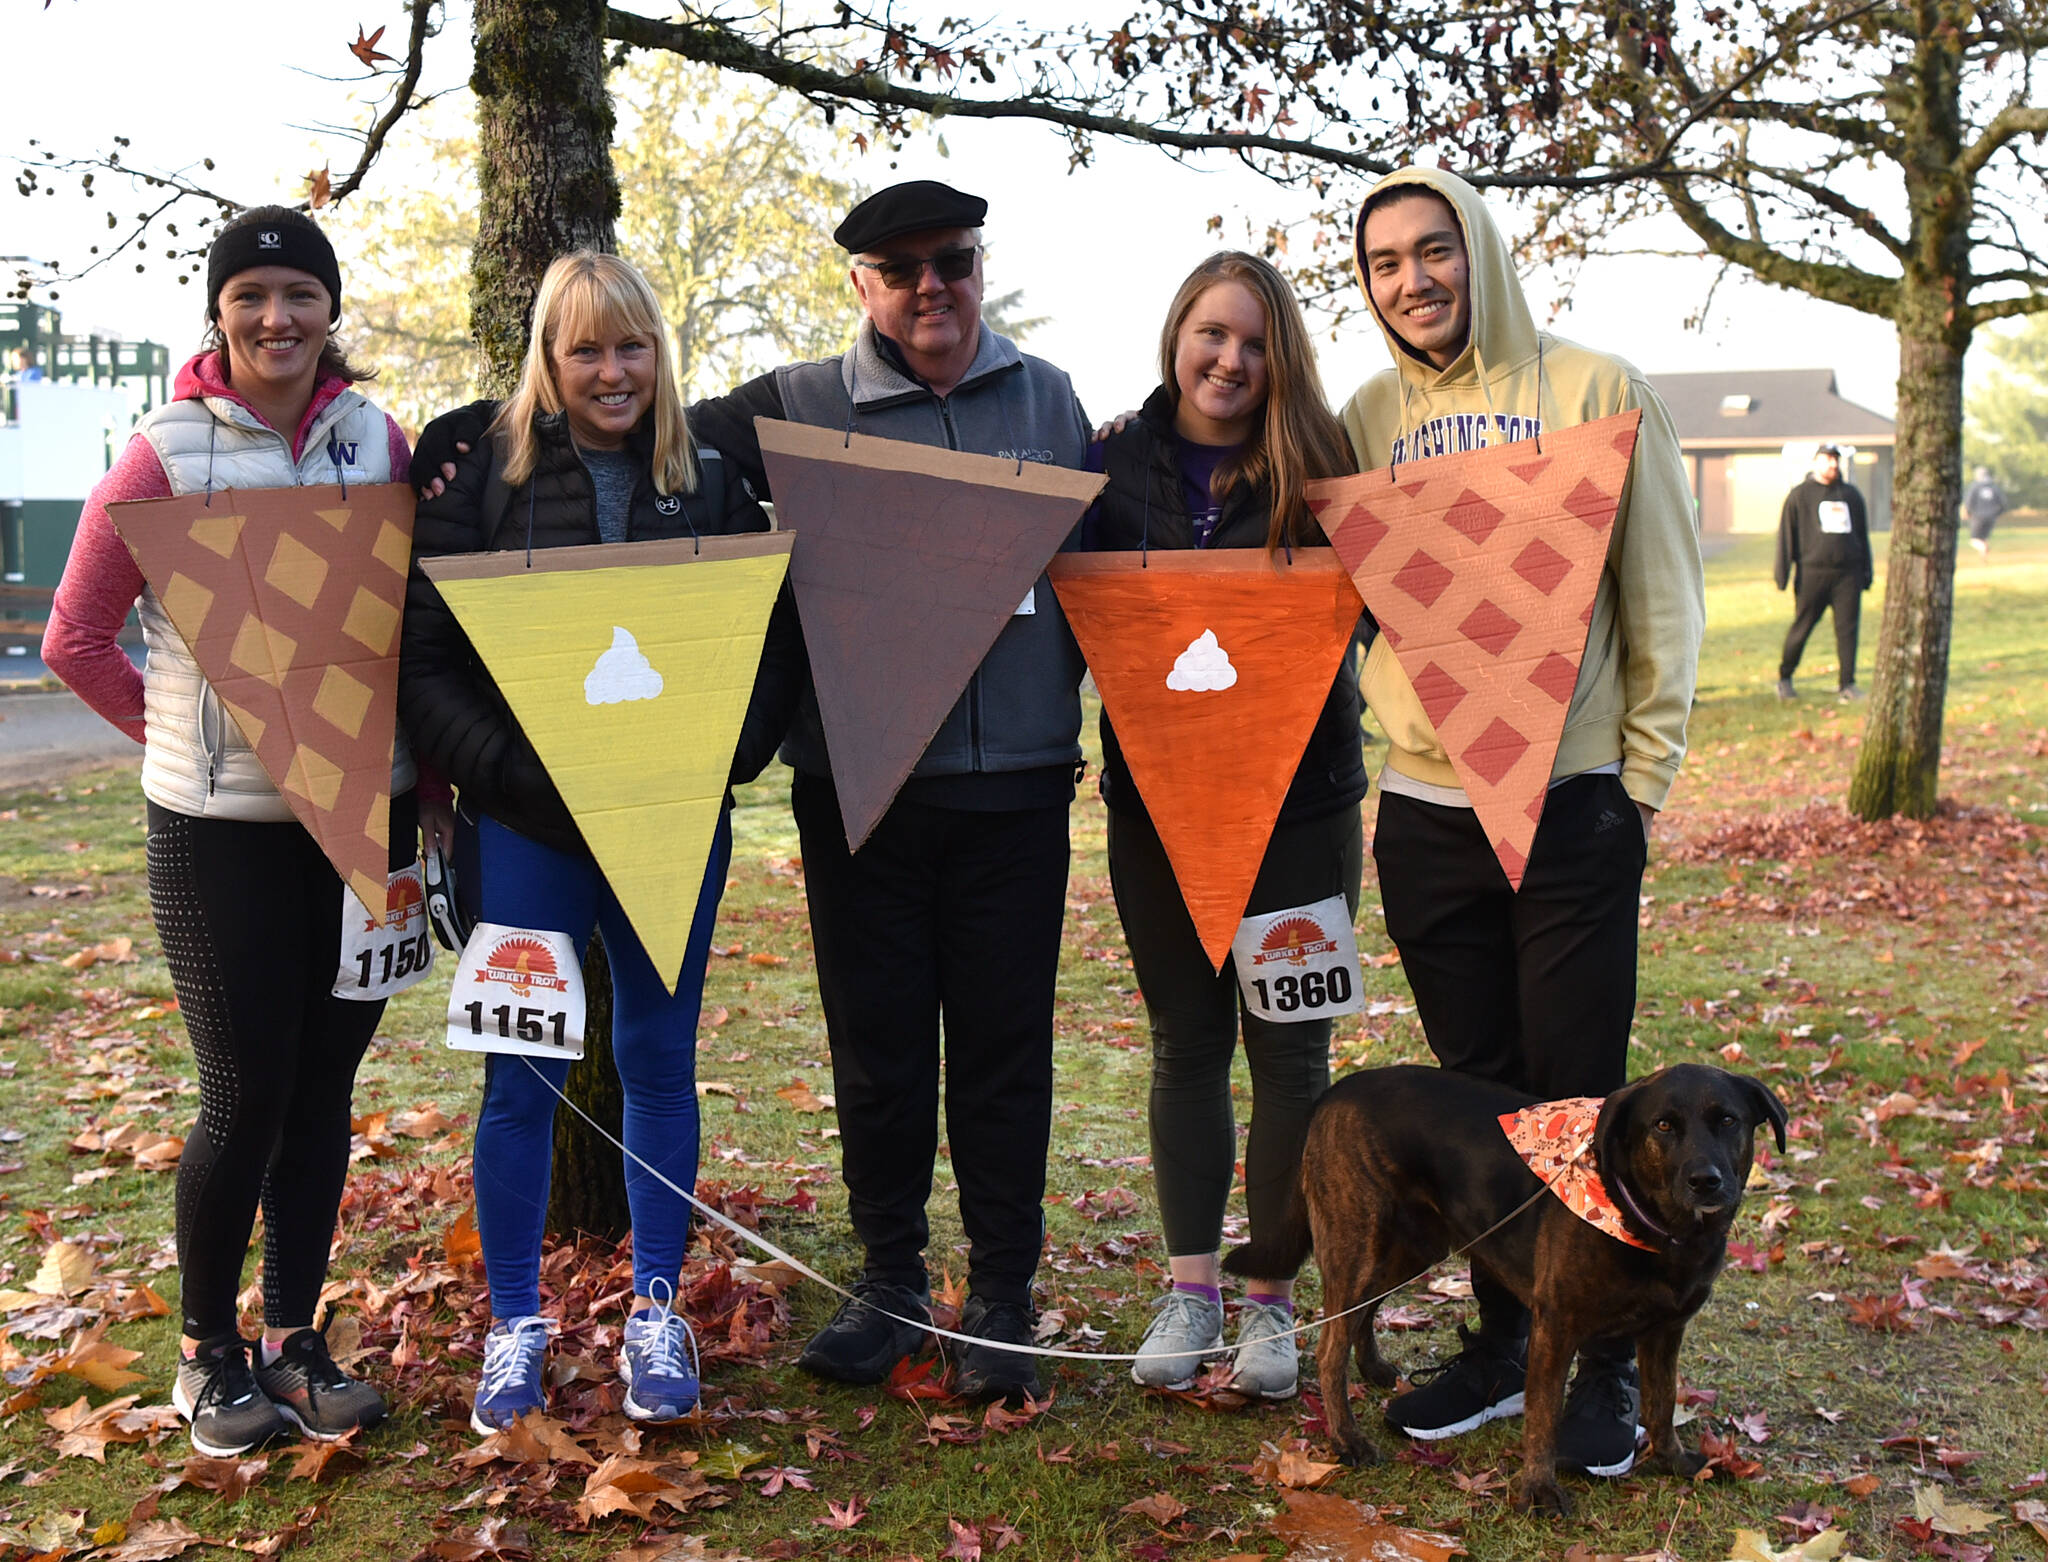 The Cox and Kusuda family ran the race dressed as slices of pie for Thanksgiving day which included; Kristin Cox as lattice, Leslie Cox as lemon, David Cox as pecan, Kaylee Kusuda as pumpkin and Kyle Kusuda as the cherry slice along with their dog Bear.